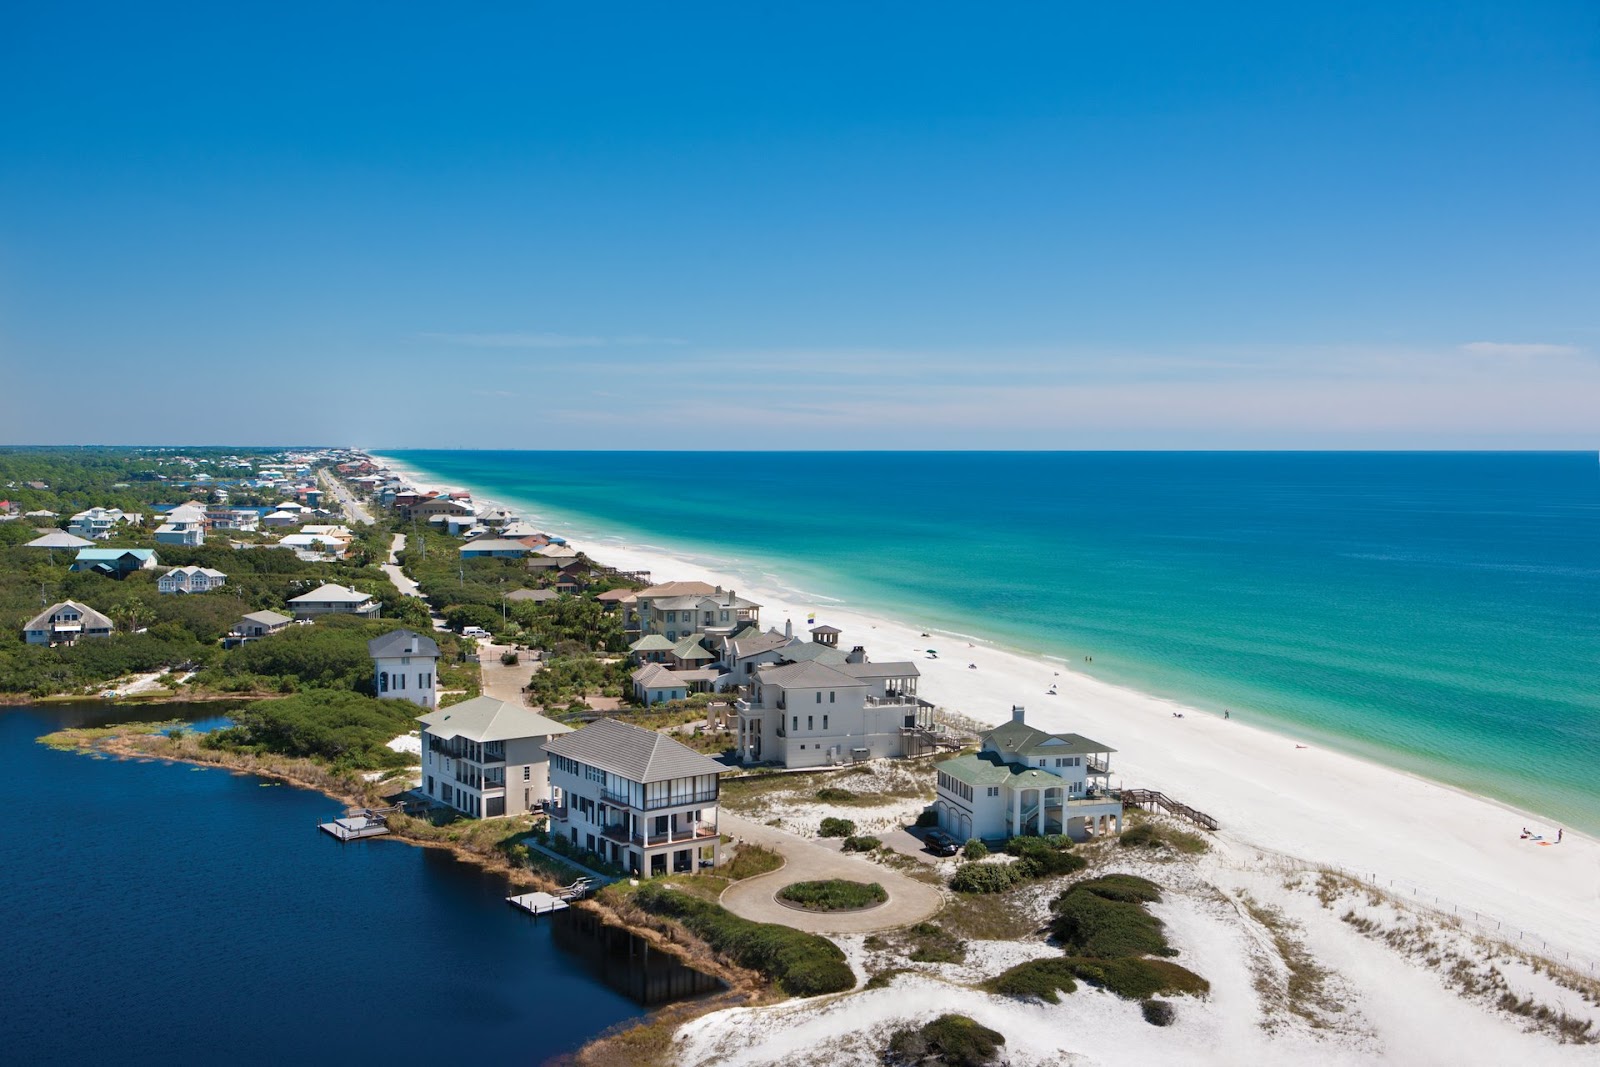 The Seaside Scenic Byway runs from Pensacola Beach to Fort Pickens.